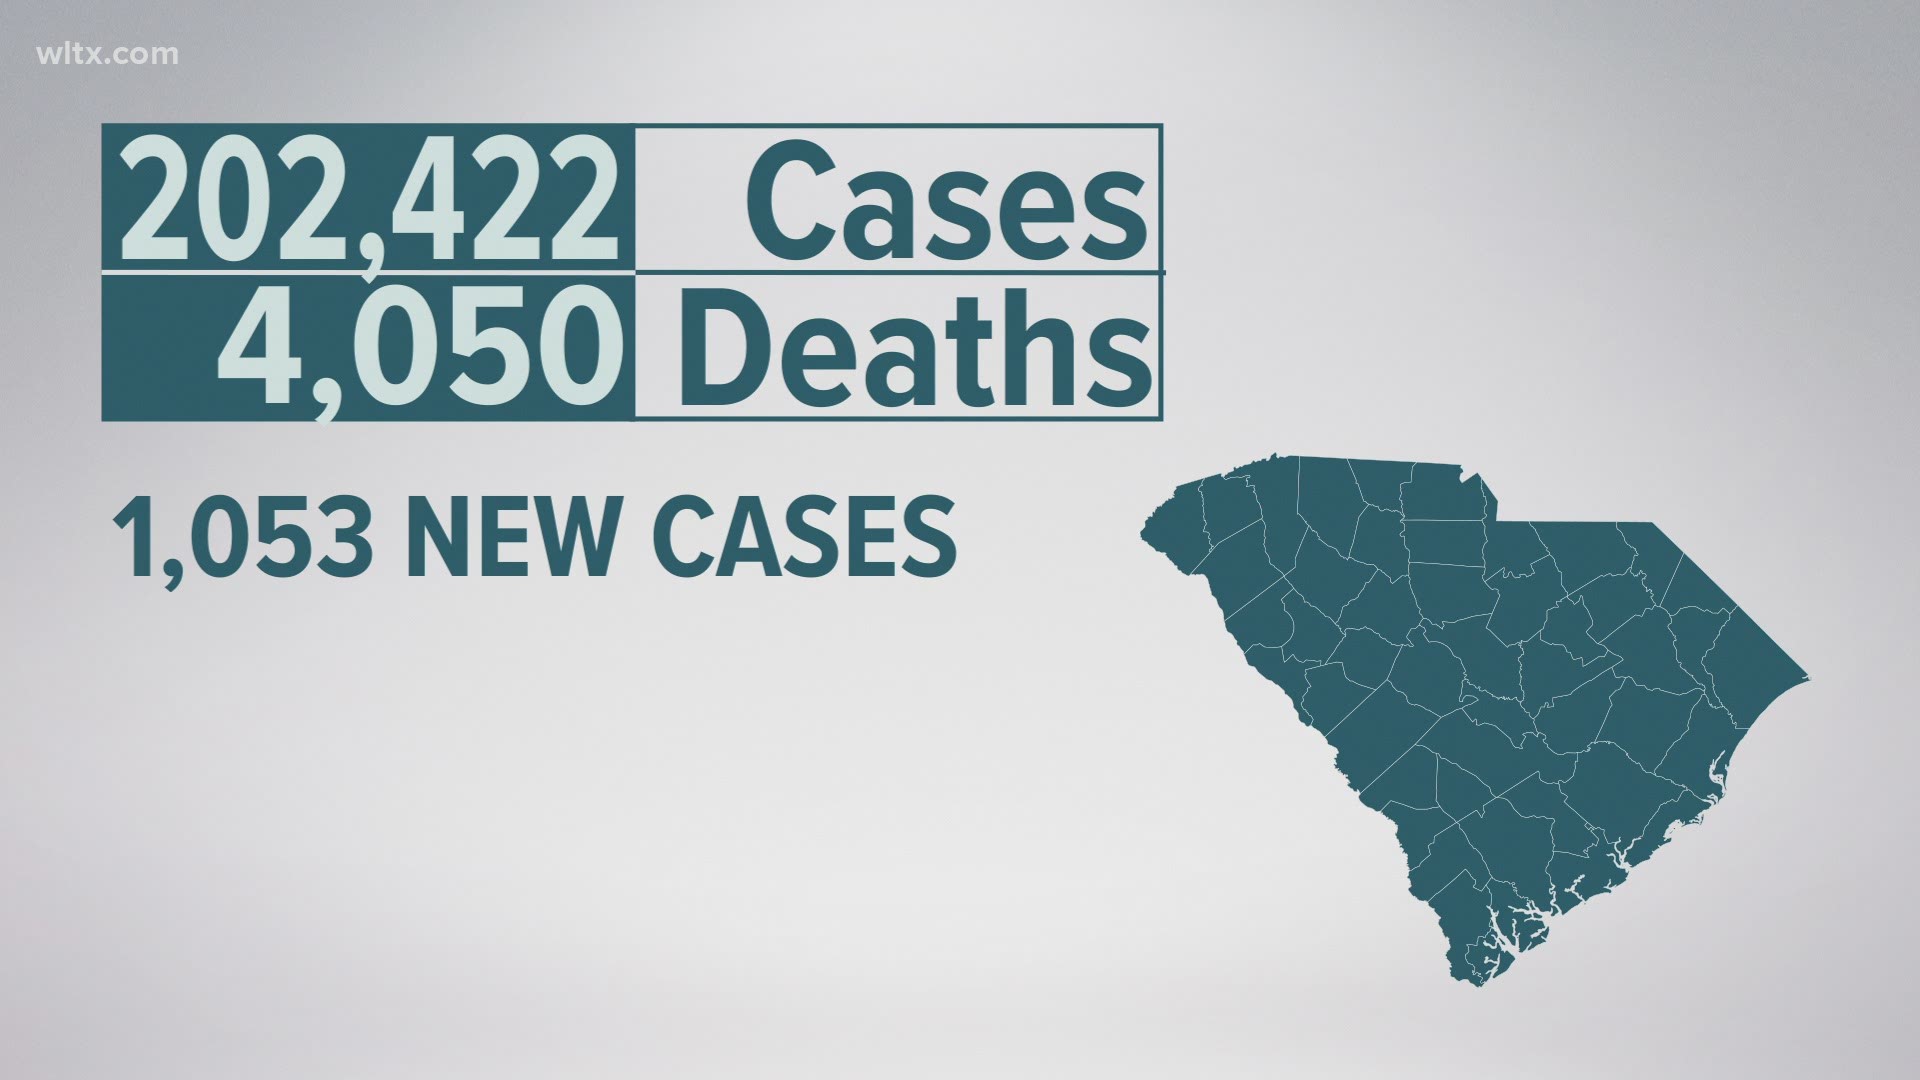 South Carolina now has had more than 1,000 daily cases for nearly two weeks